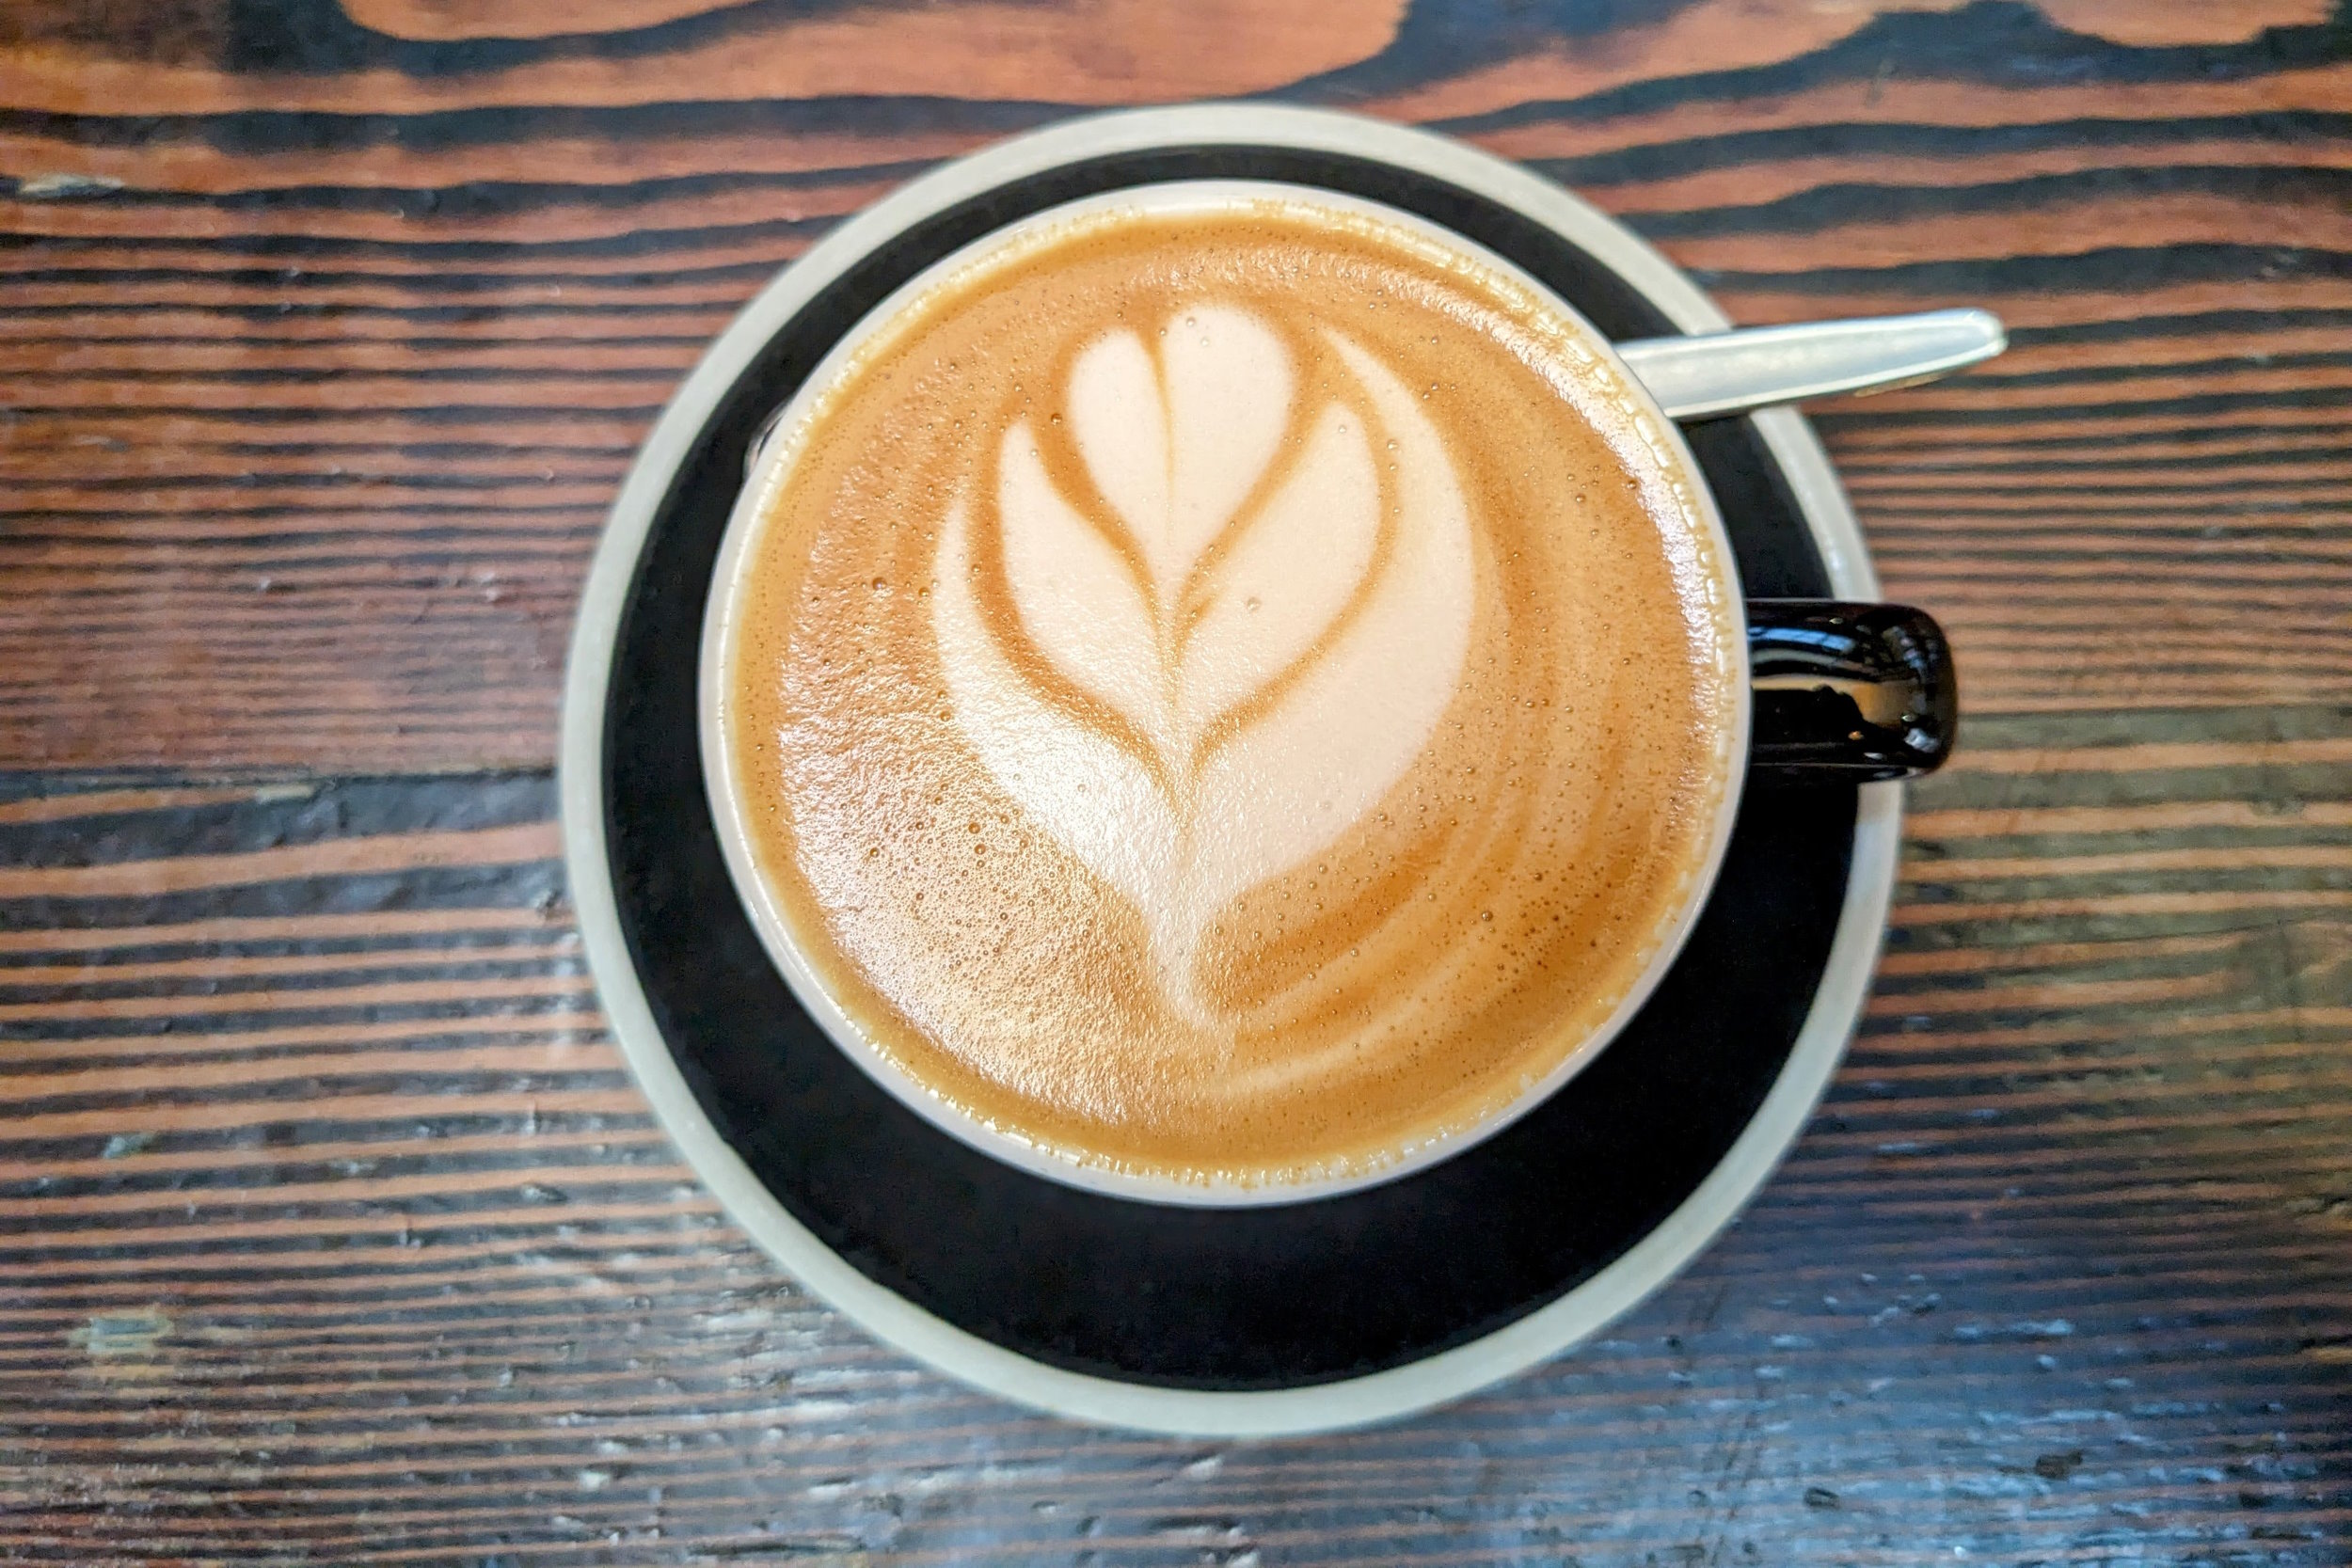 Overhead view of coffee with latte art, in a black cup on a matching saucer, sitting on a dark wood-grained table.